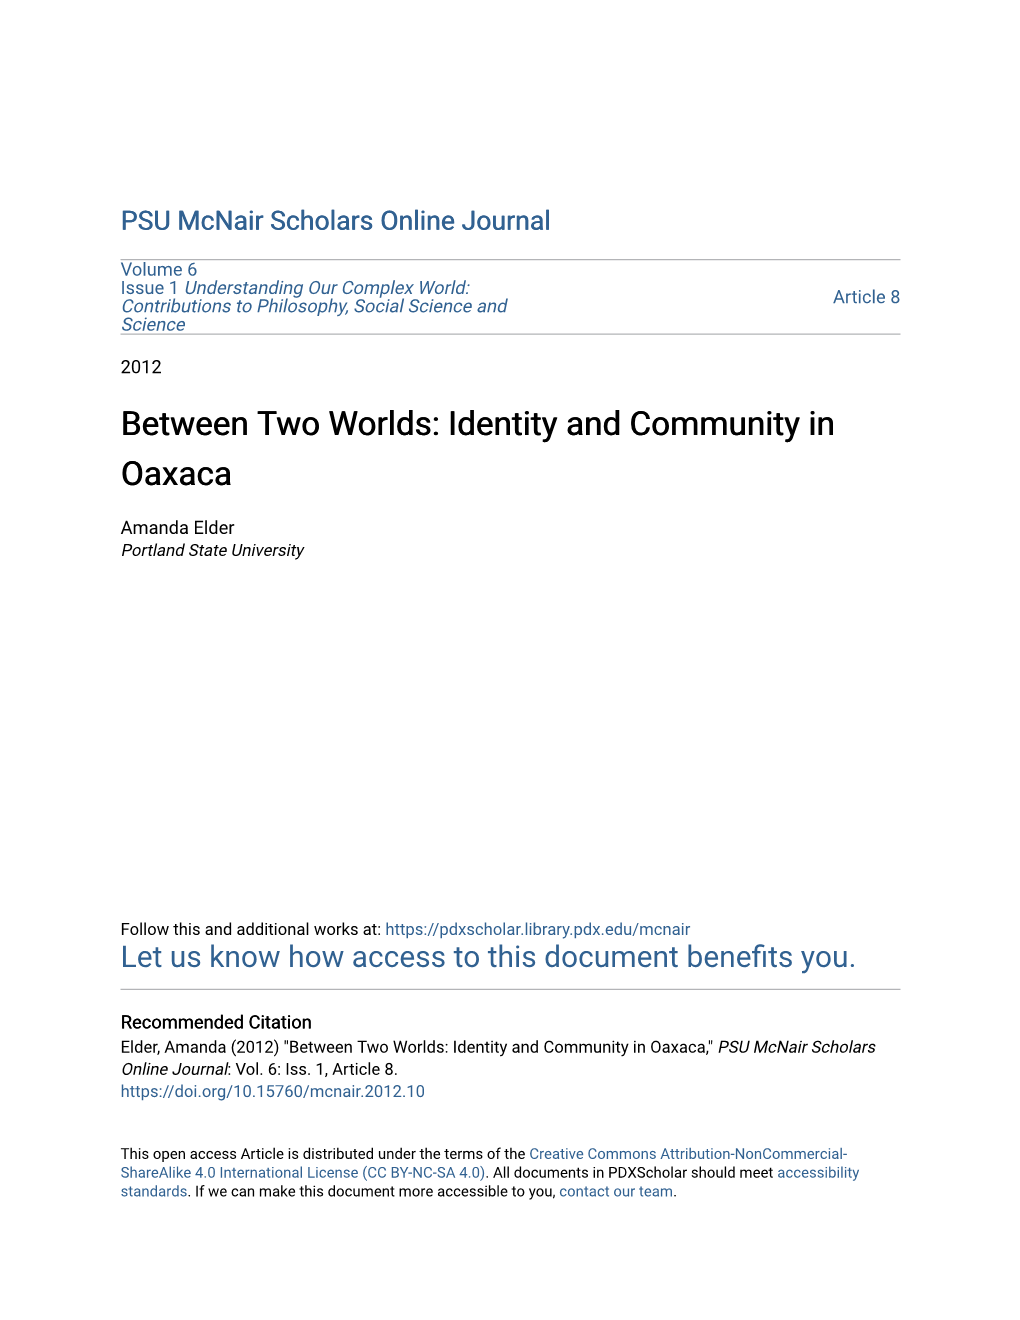 Between Two Worlds: Identity and Community in Oaxaca